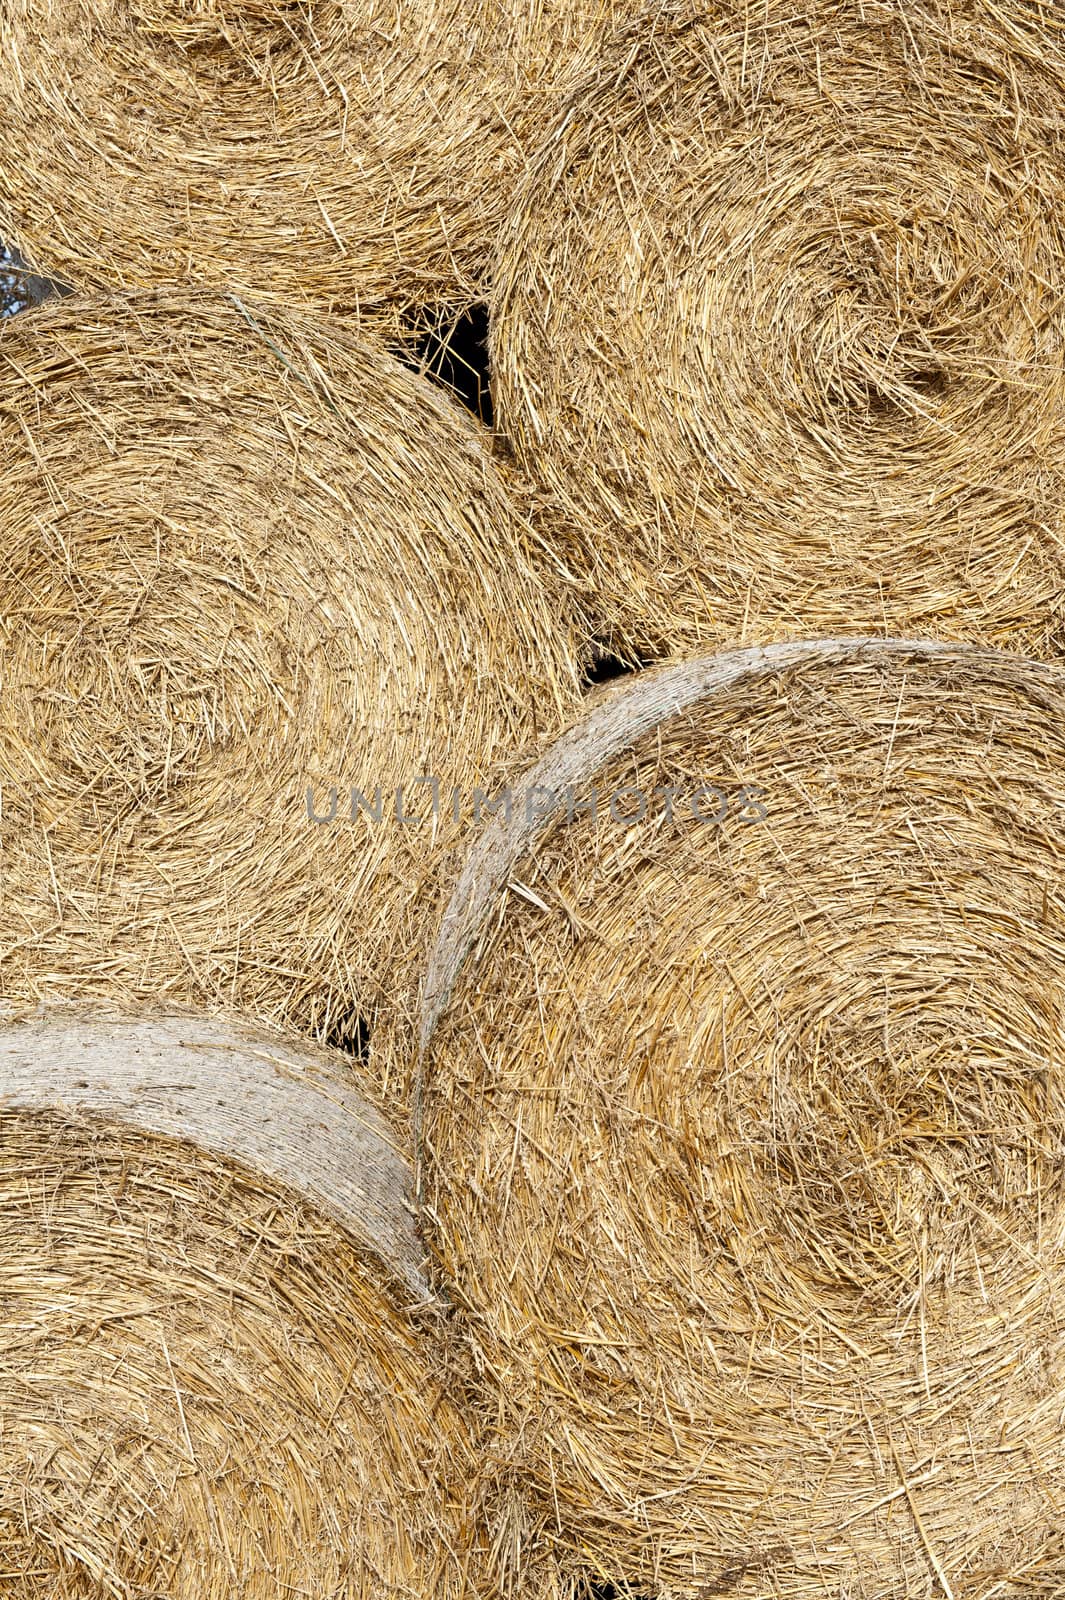 Straw bales by fyletto